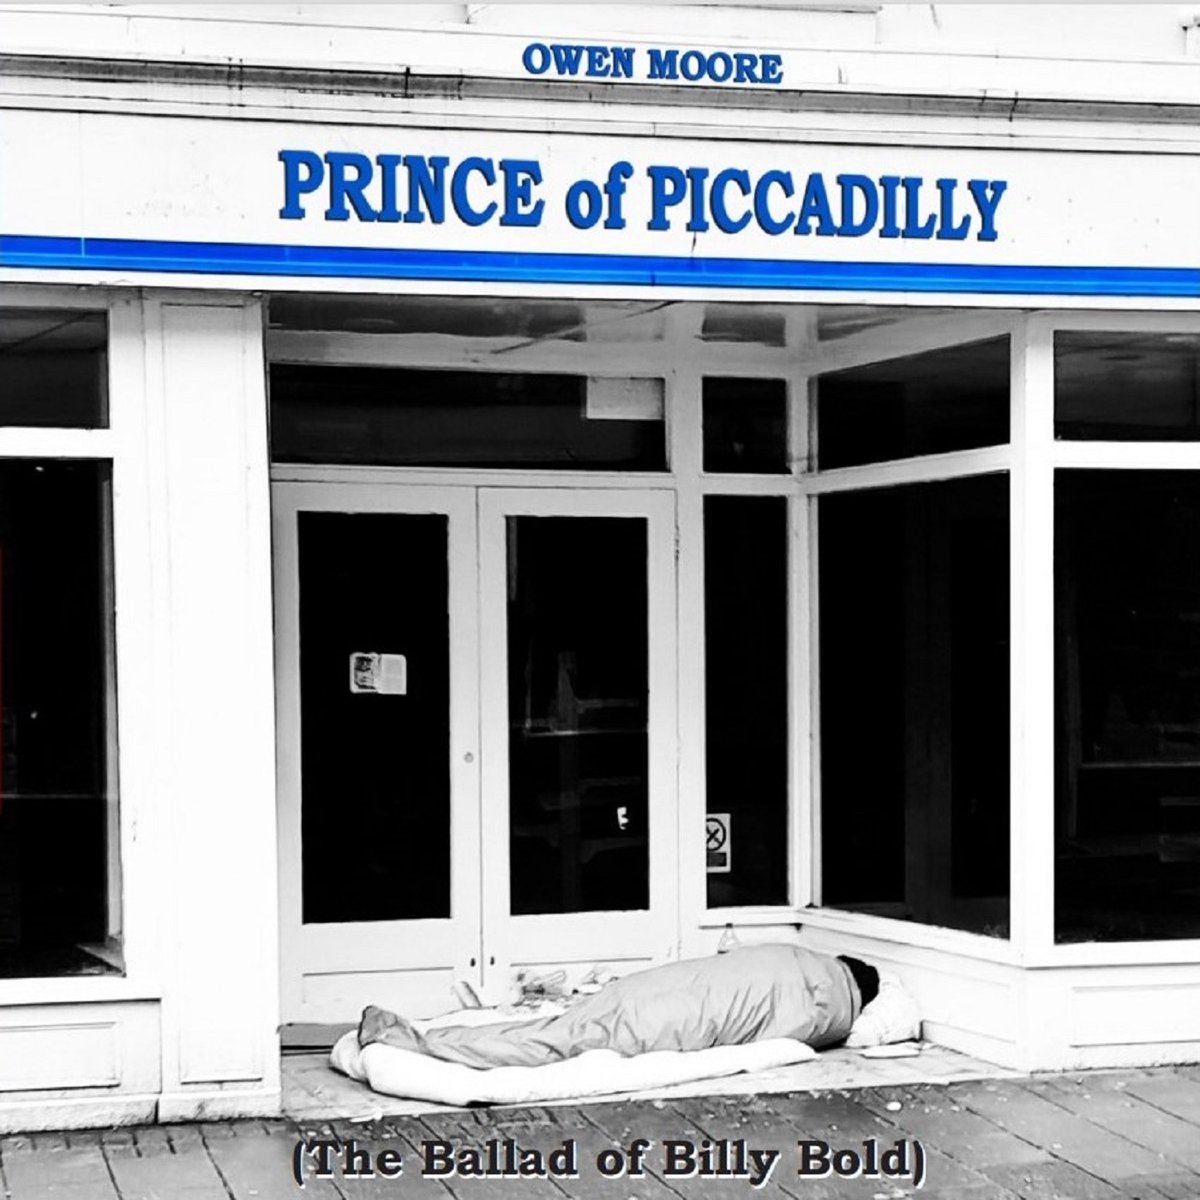 ... new Owen Moore song available online as from today: 'Prince of Piccadilly (The Ballad of Billy Bold)'...